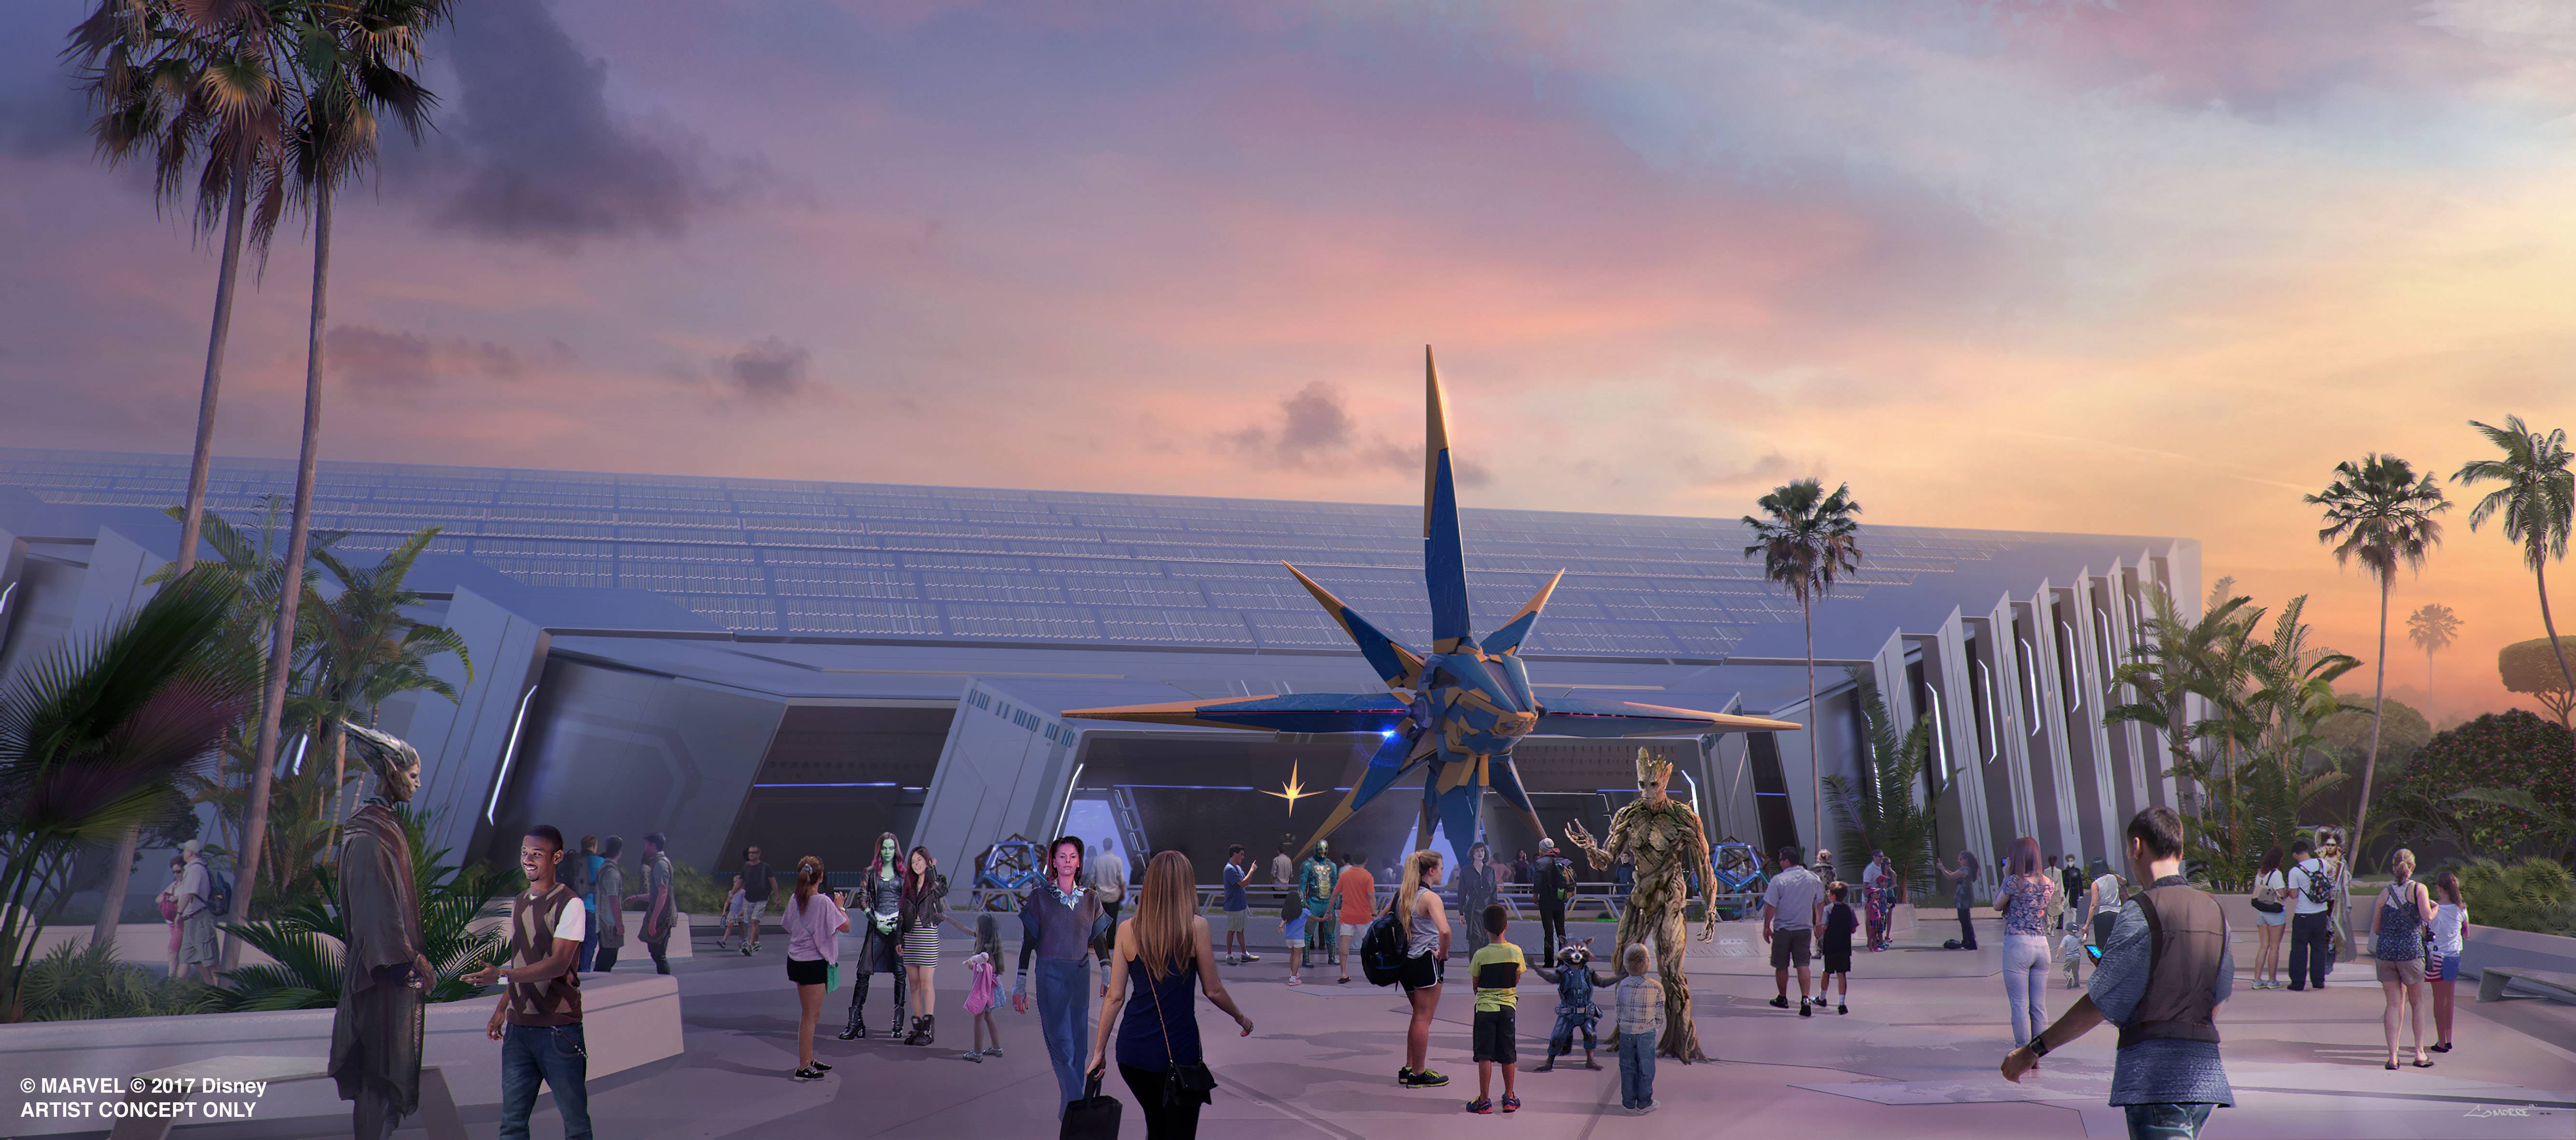 PHOTO - Guardians of the Galaxy Cosmic Rewind is the name of the new coaster coming to Epcot